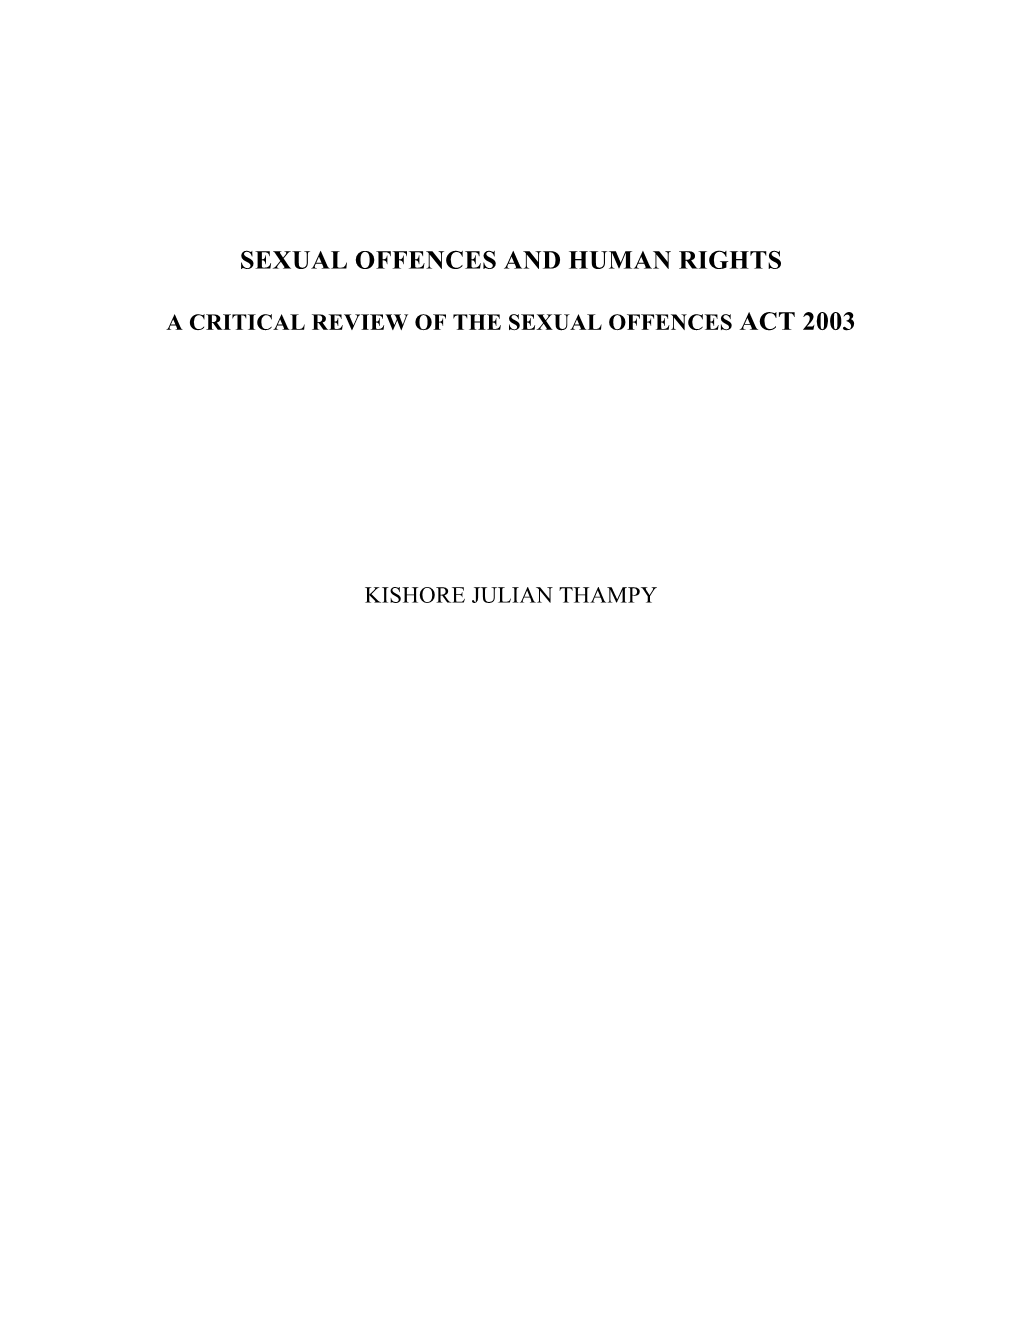 Sexual Offences and Human Rights